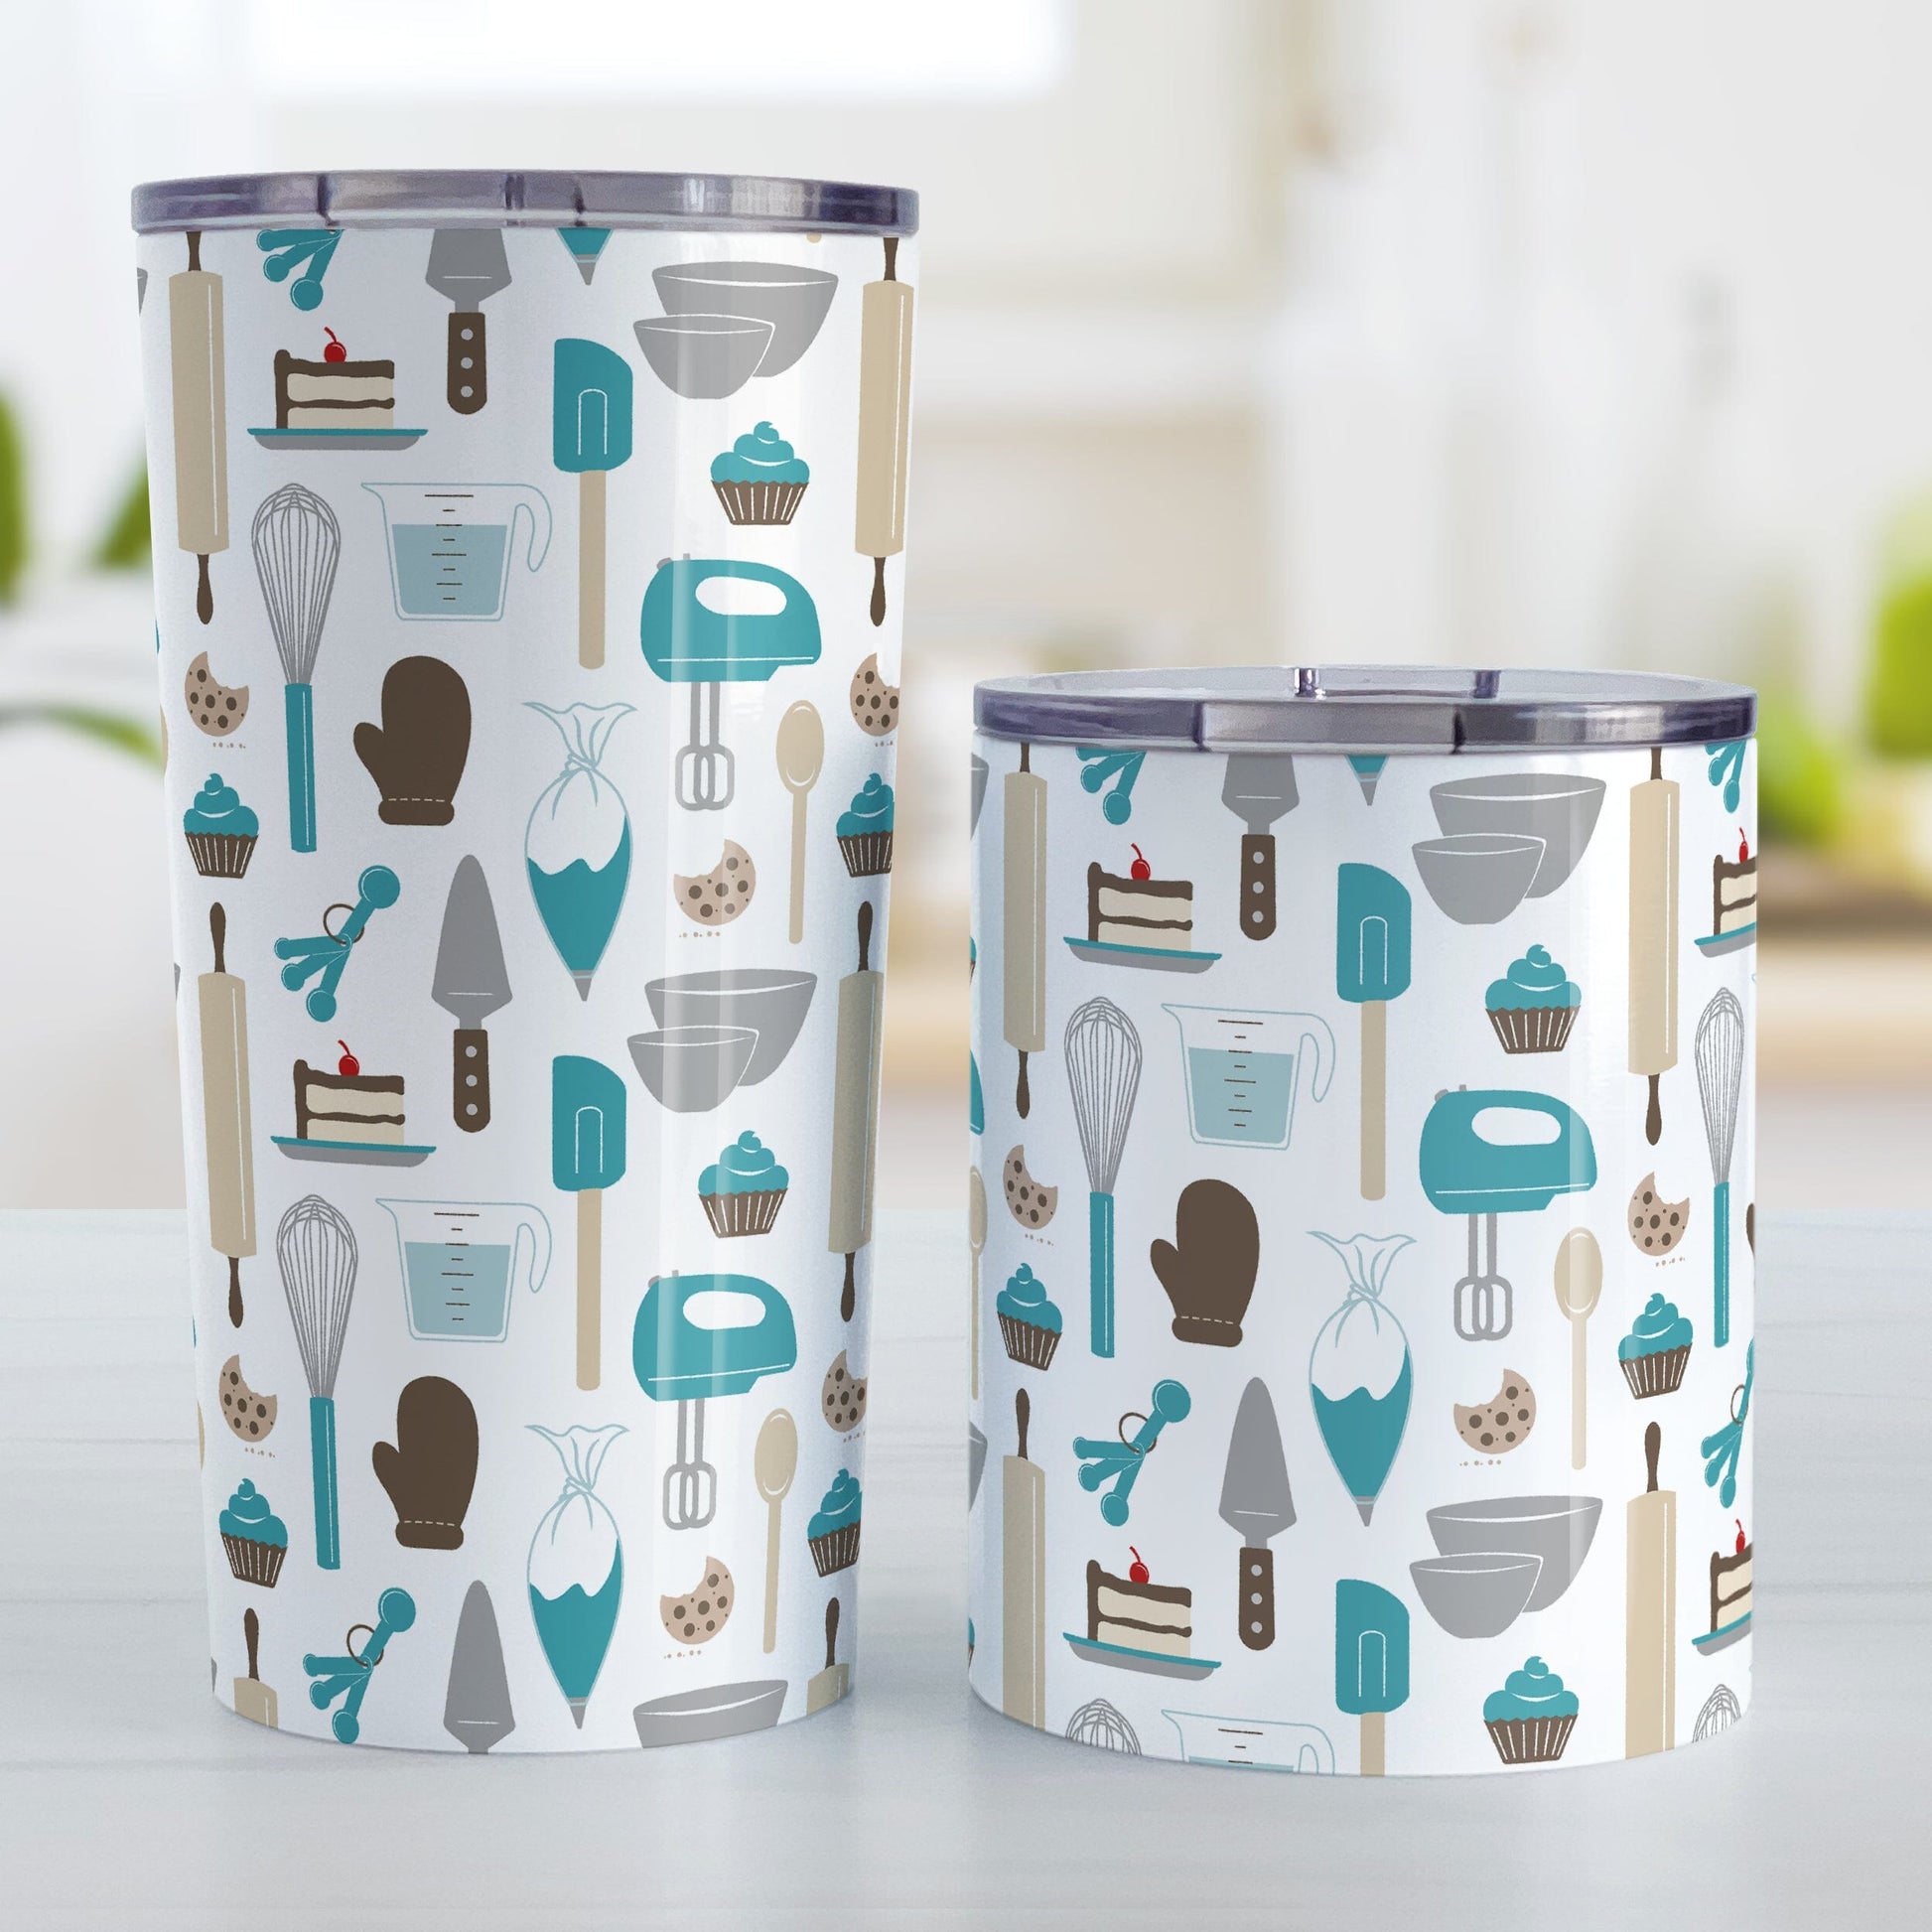 Turquoise Baking Pattern Tumbler Cups (20oz or 10oz) at Amy's Coffee Mugs. Stainless steel tumbler cups designed with a pattern of baking tools like spatulas, whisks, mixers, bowls, and spoons, with cookies, cupcakes, and cake all in a turquoise, gray, brown, and beige color scheme that wraps around the cups. Photo shows both sized cups on a table next to each other.